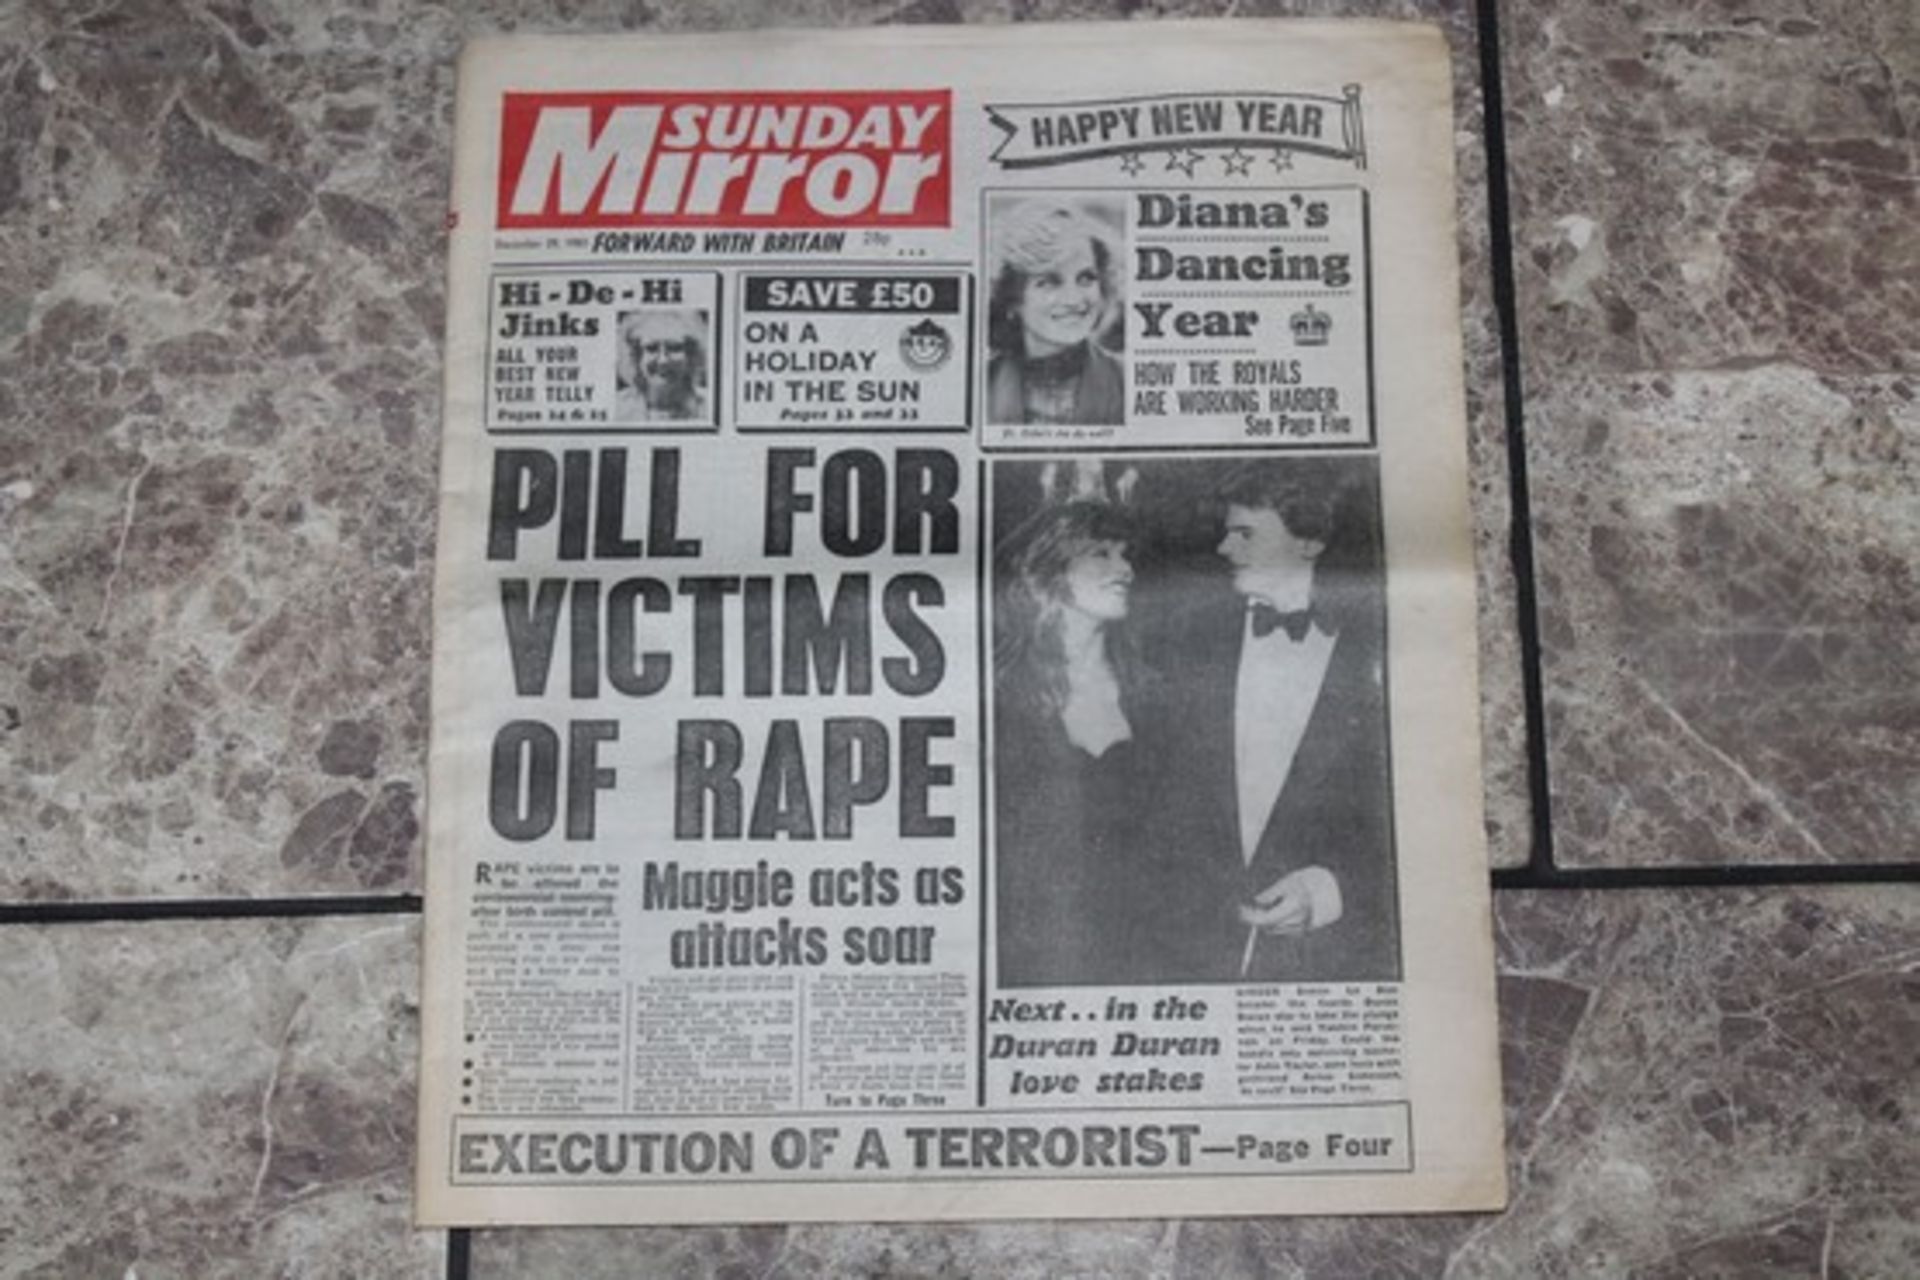 **DECEMBER 29, 1985** SUNDAY MIRROR. FRONT COVER: PILL FOR VICTIMS OF RAPE, MAGGIE ACTS AS ATTACKS